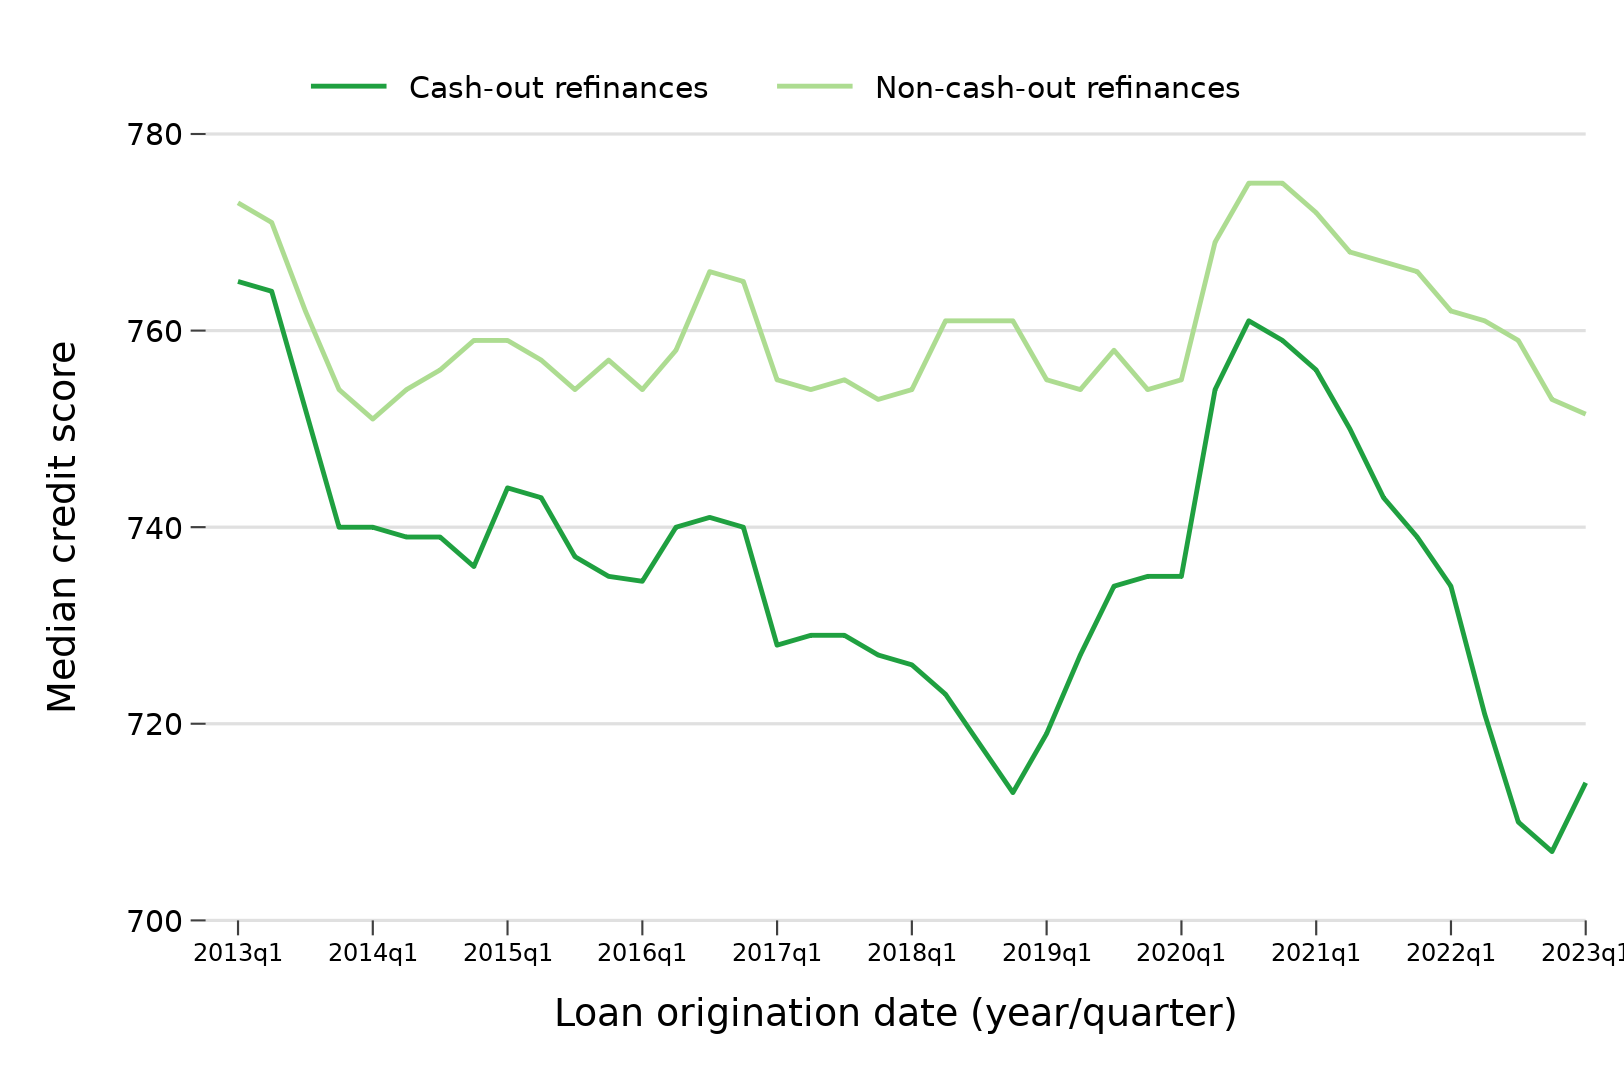 Line graph showing median credit scores at origination for borrowers of cash-out refinances and borrowers of non-cash-out refinances, by quarter, from the first quarter of 2013 to the first quarter of 2023. The median credit scores of cash-out refinance borrowers were lower than non-cash-out refinance borrowers during the entire time period.